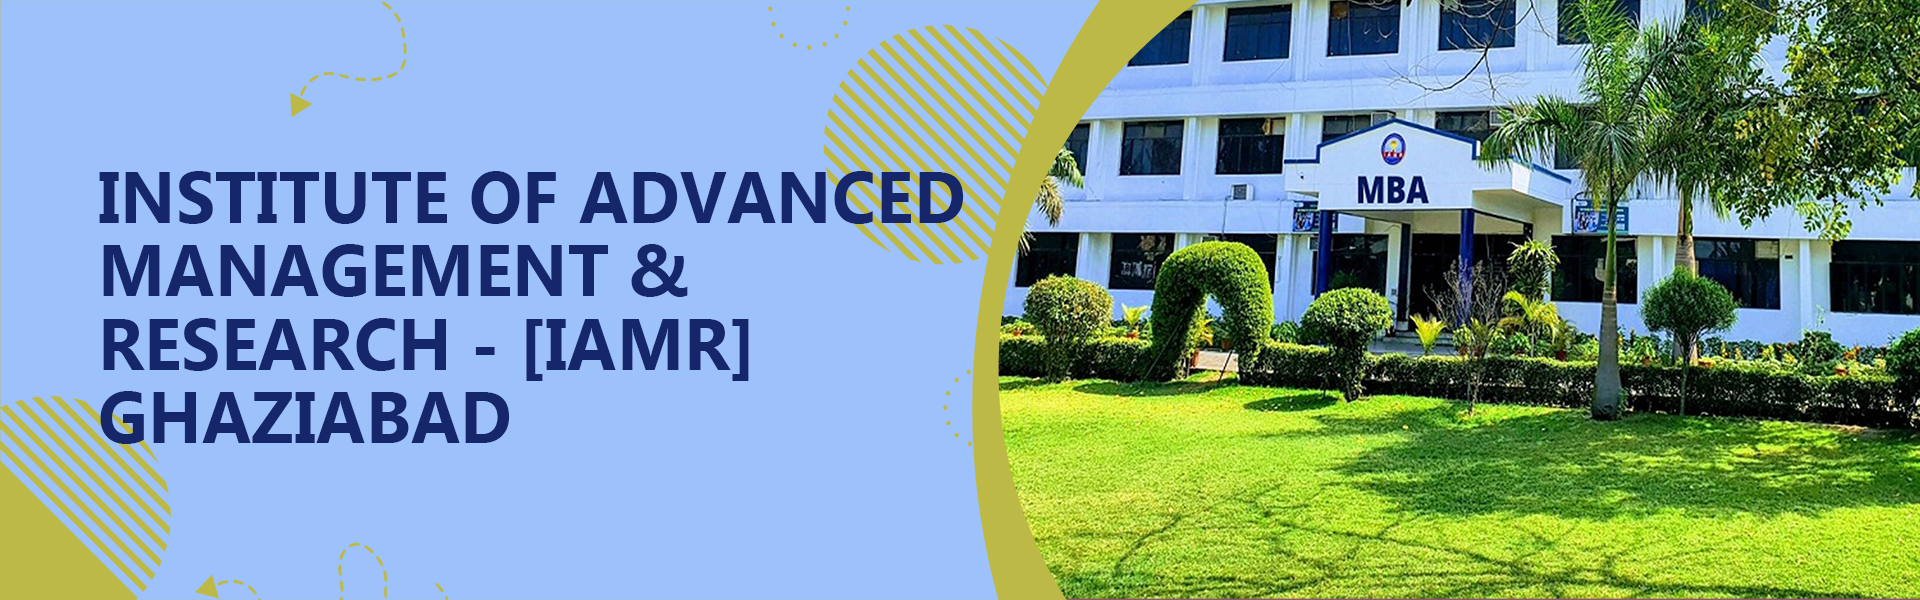 Institute Of Advanced Management & Research - [IAMR], Ghaziabad